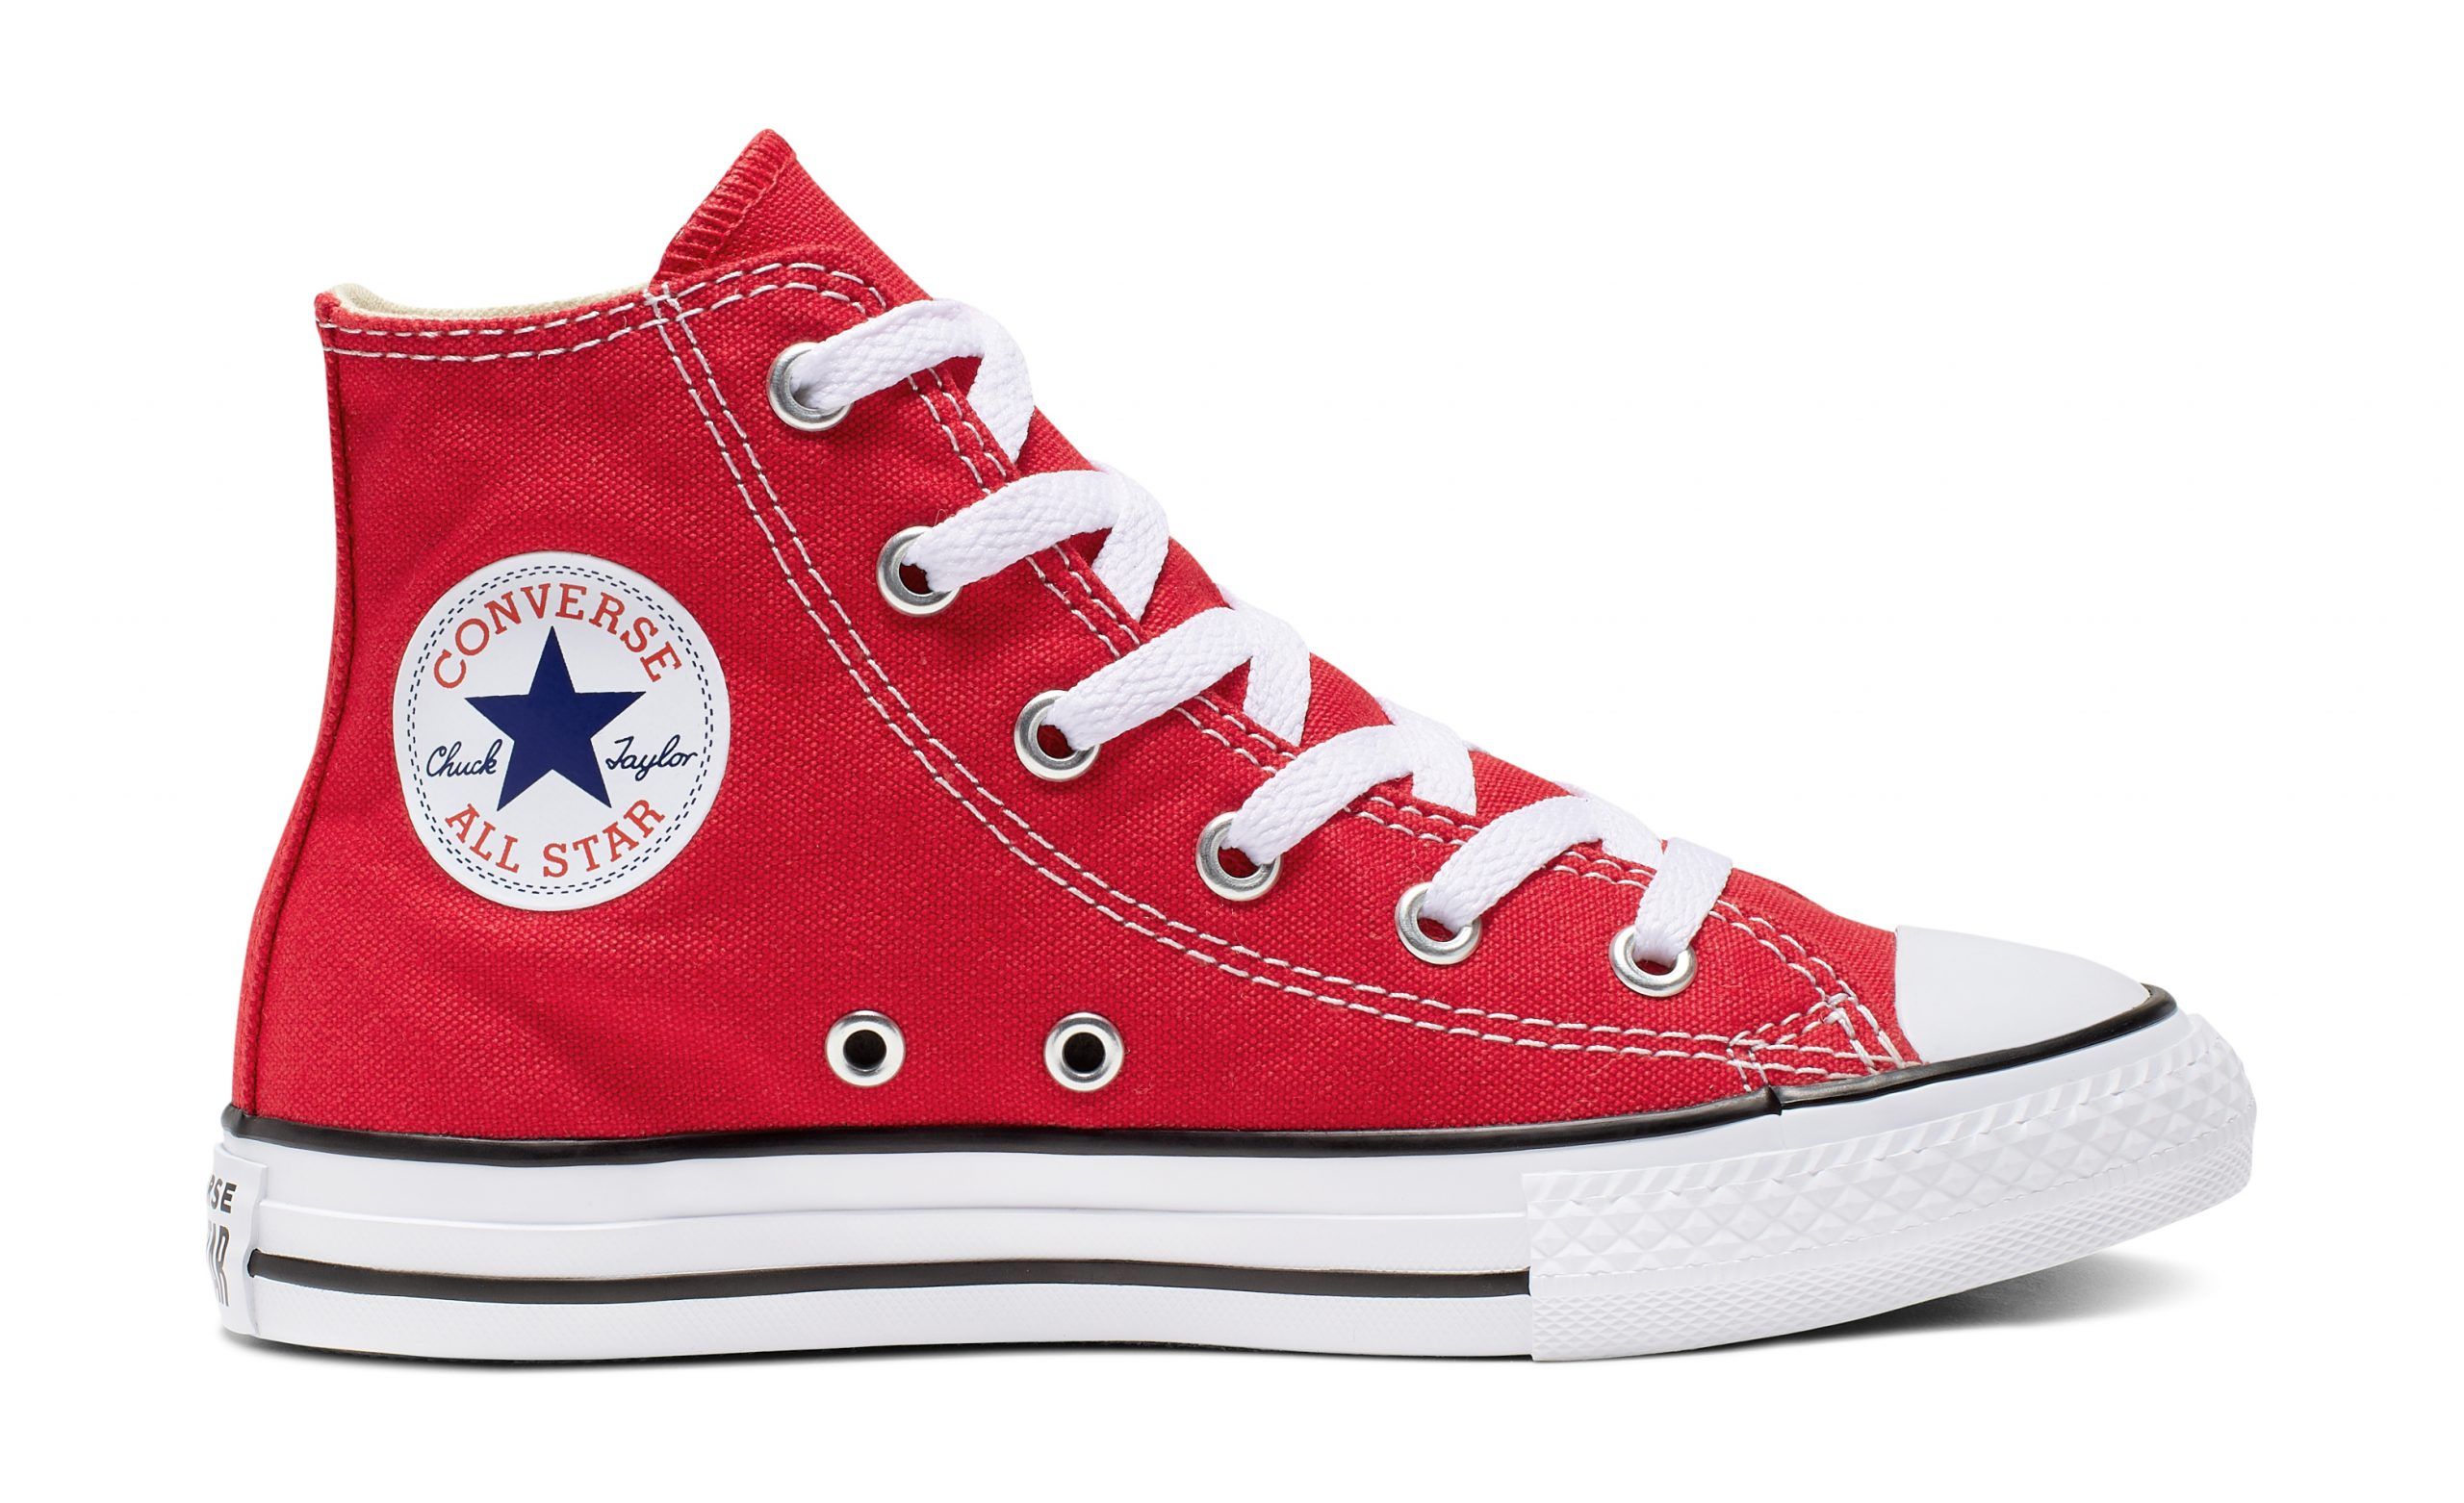 Converse Chuck Taylor All Star High Top Sneakers